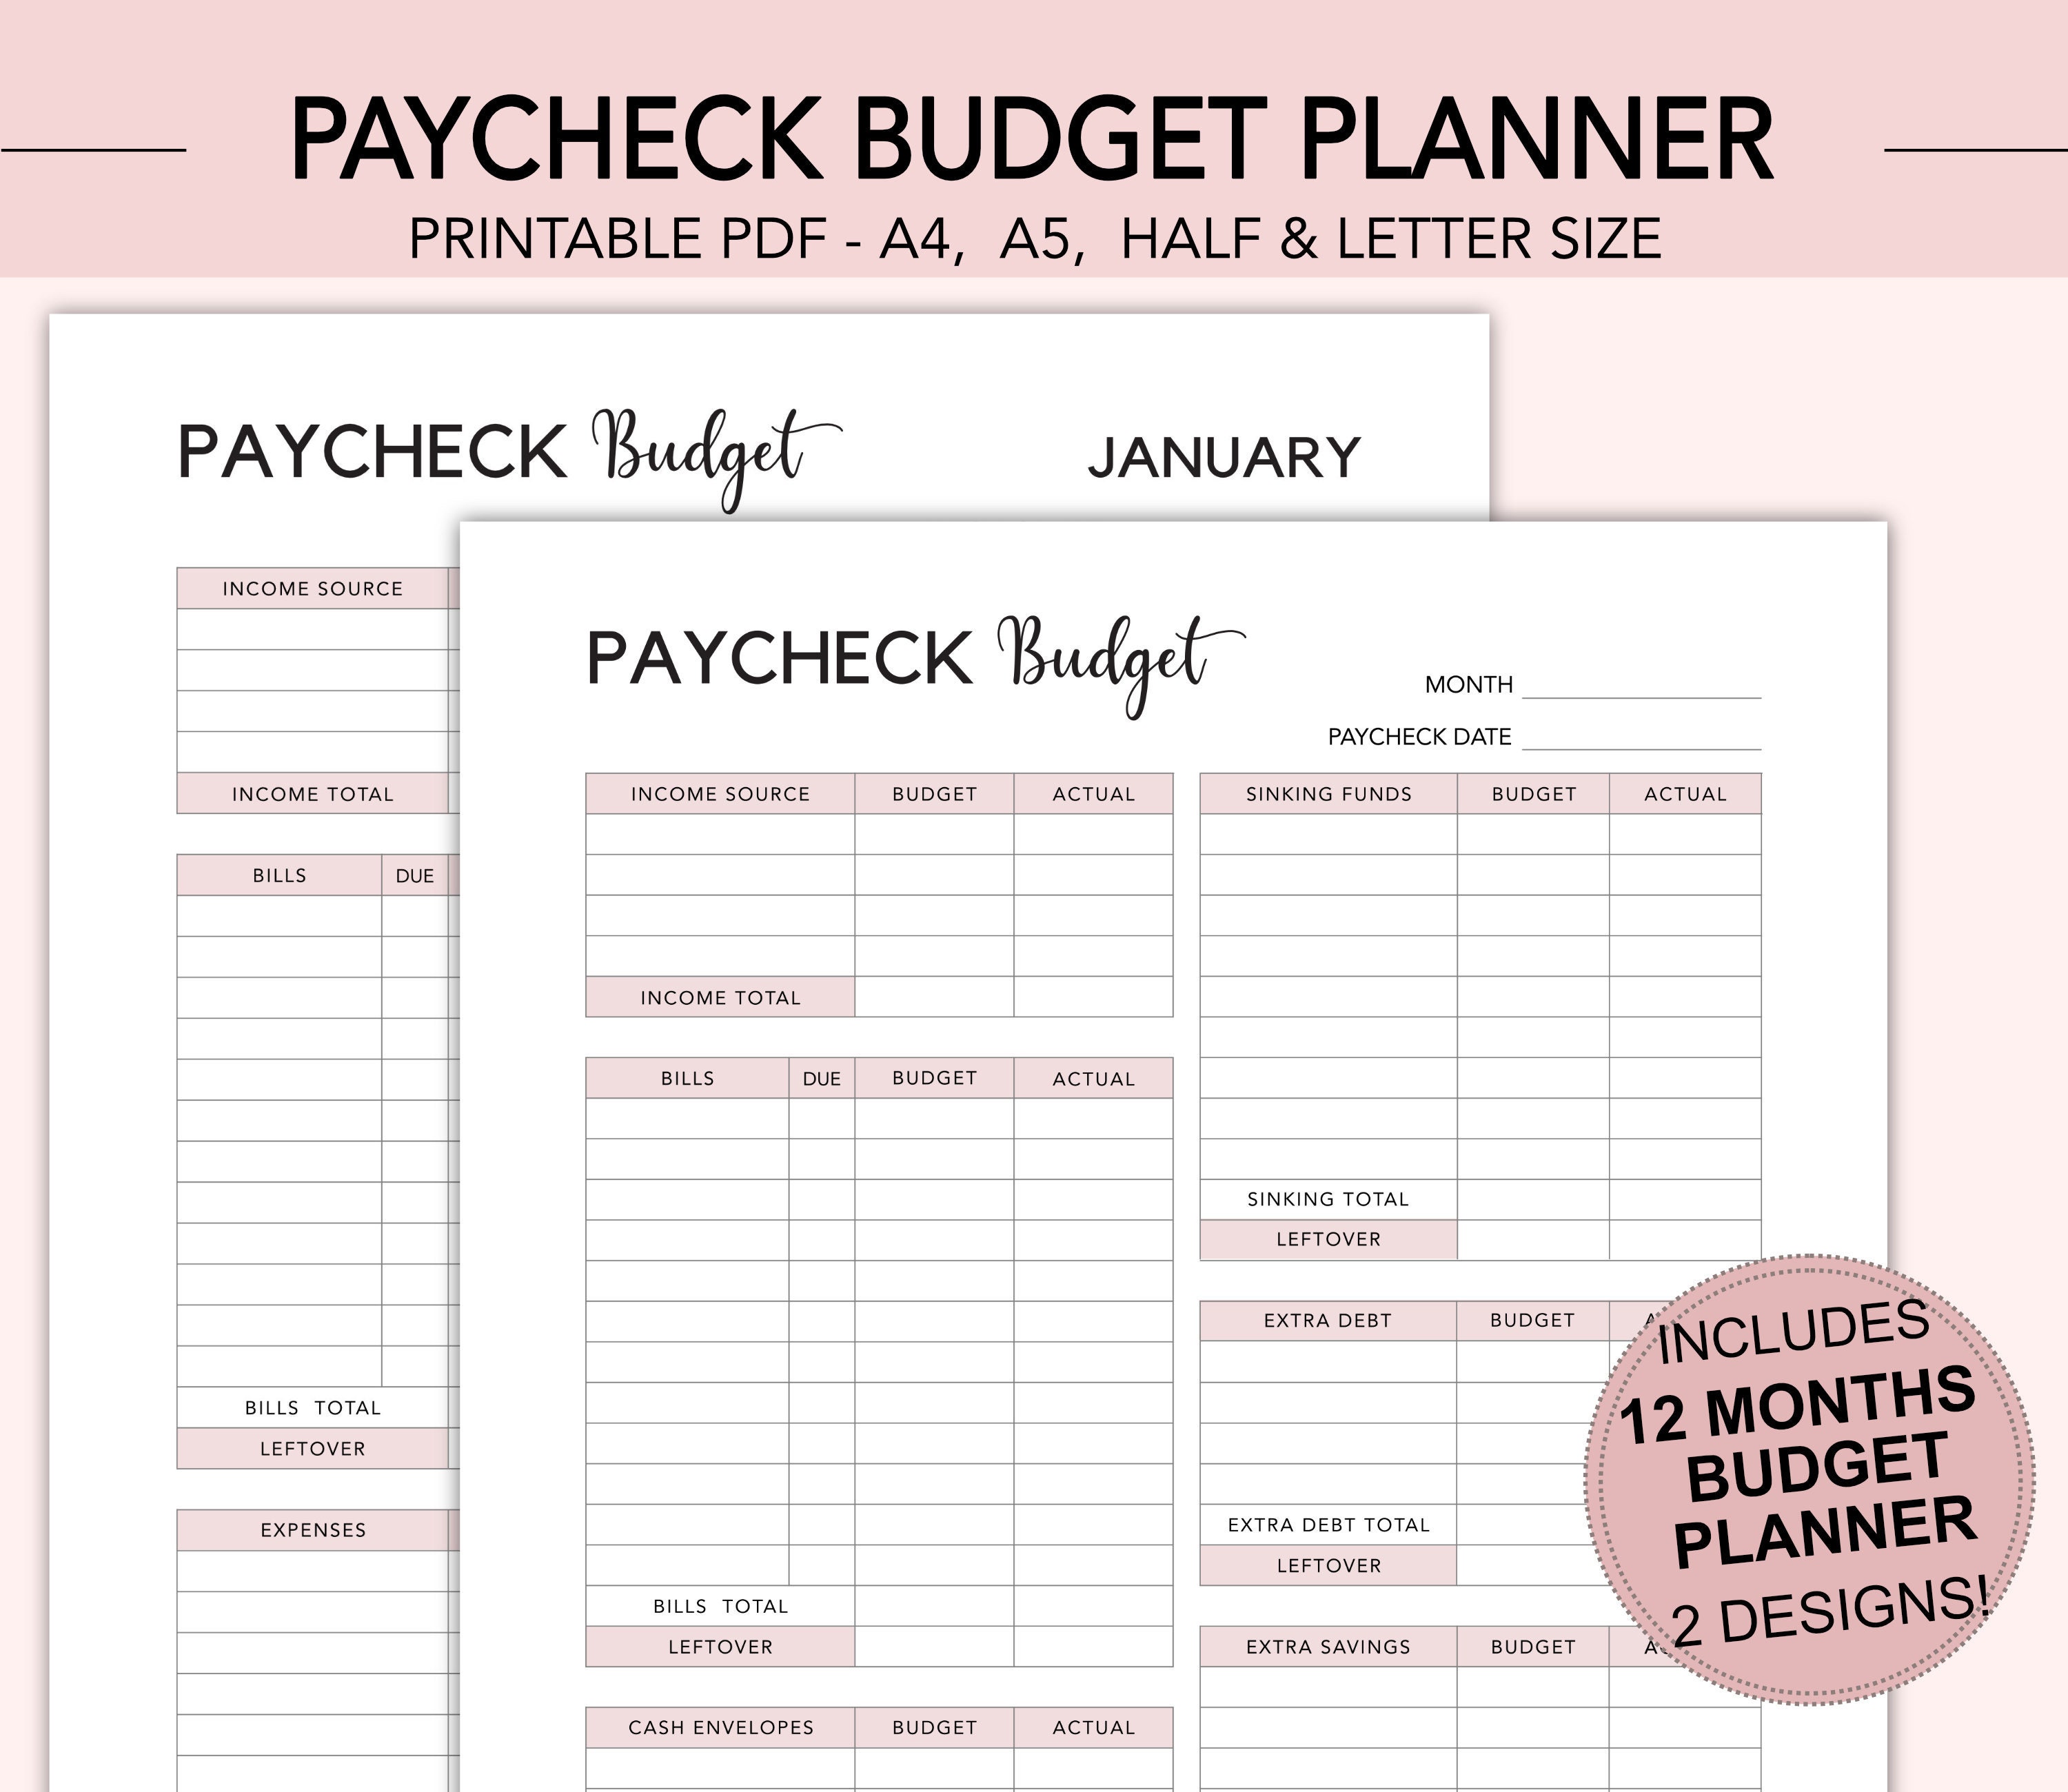 paycheck-budget-planner-printable-budget-by-paycheck-worksheet-biweekly